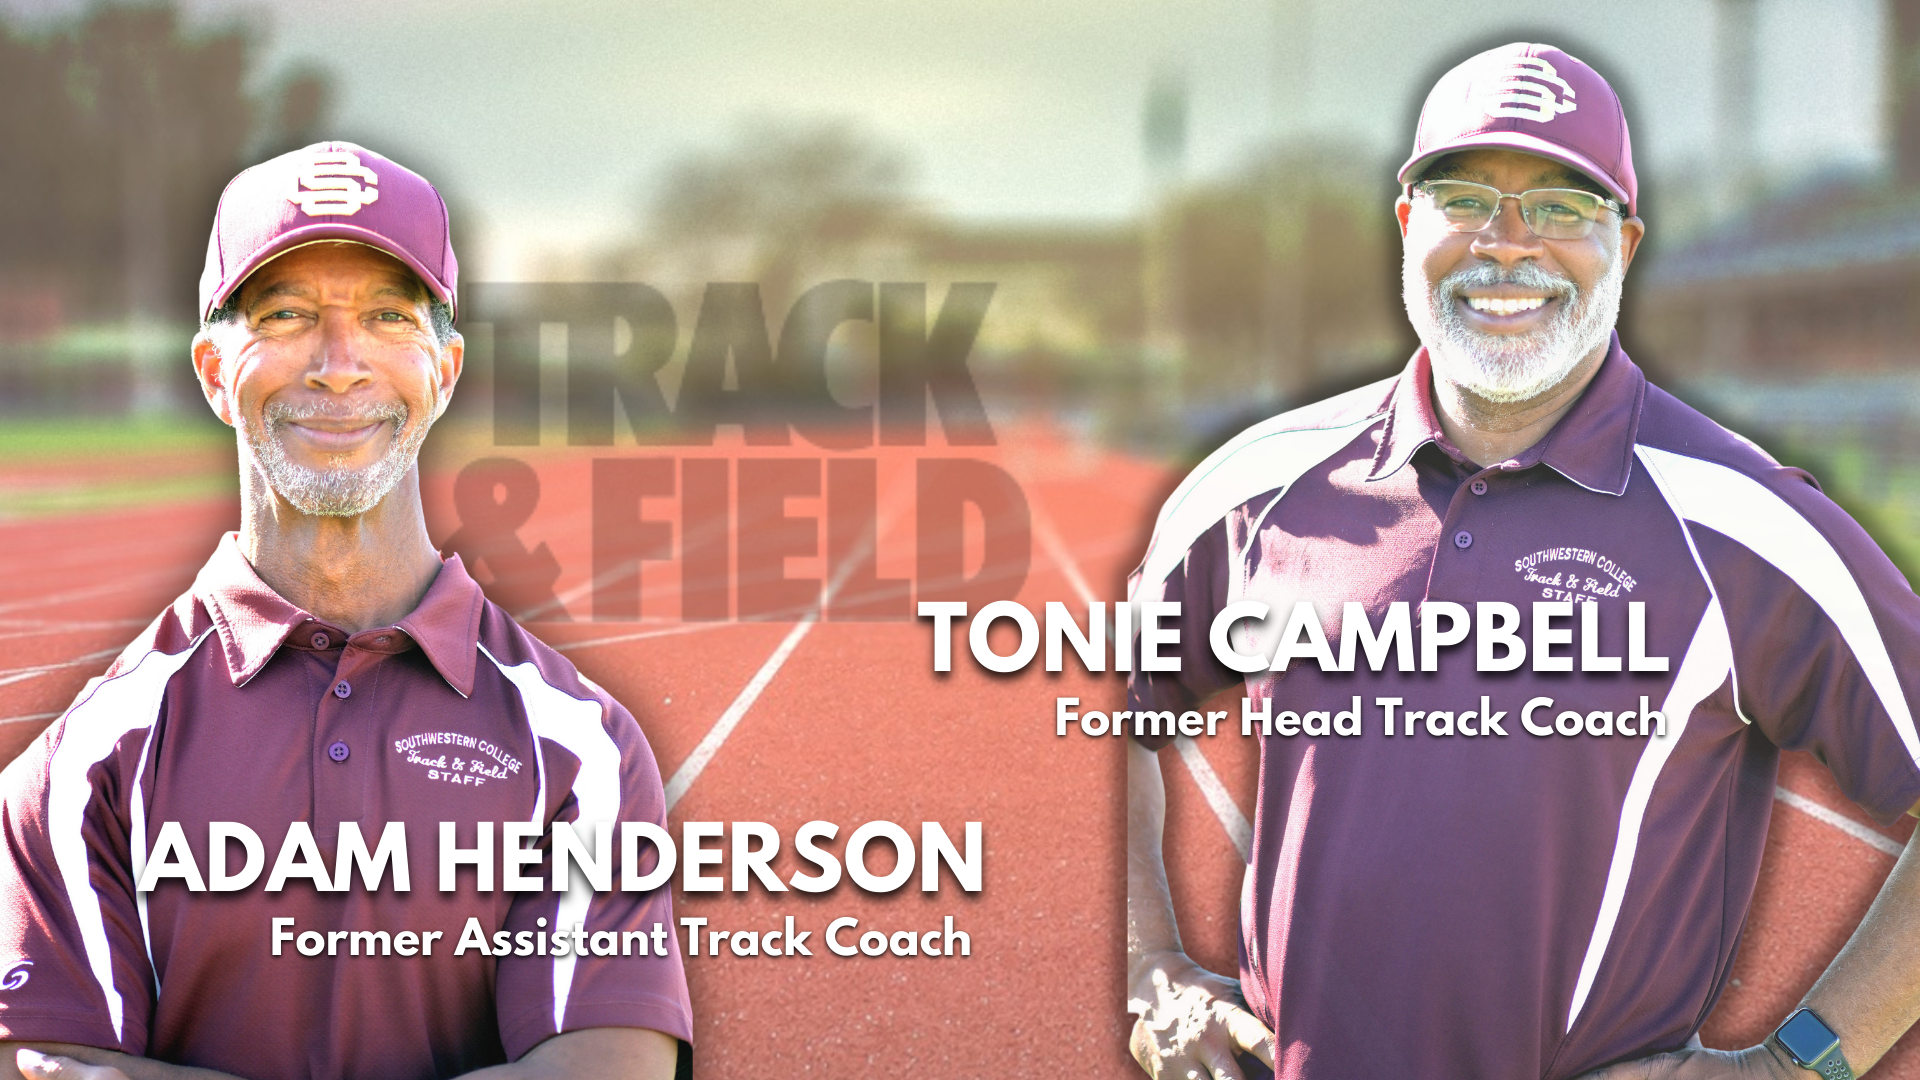 Today we celebrate retirement and career change of former track coaches